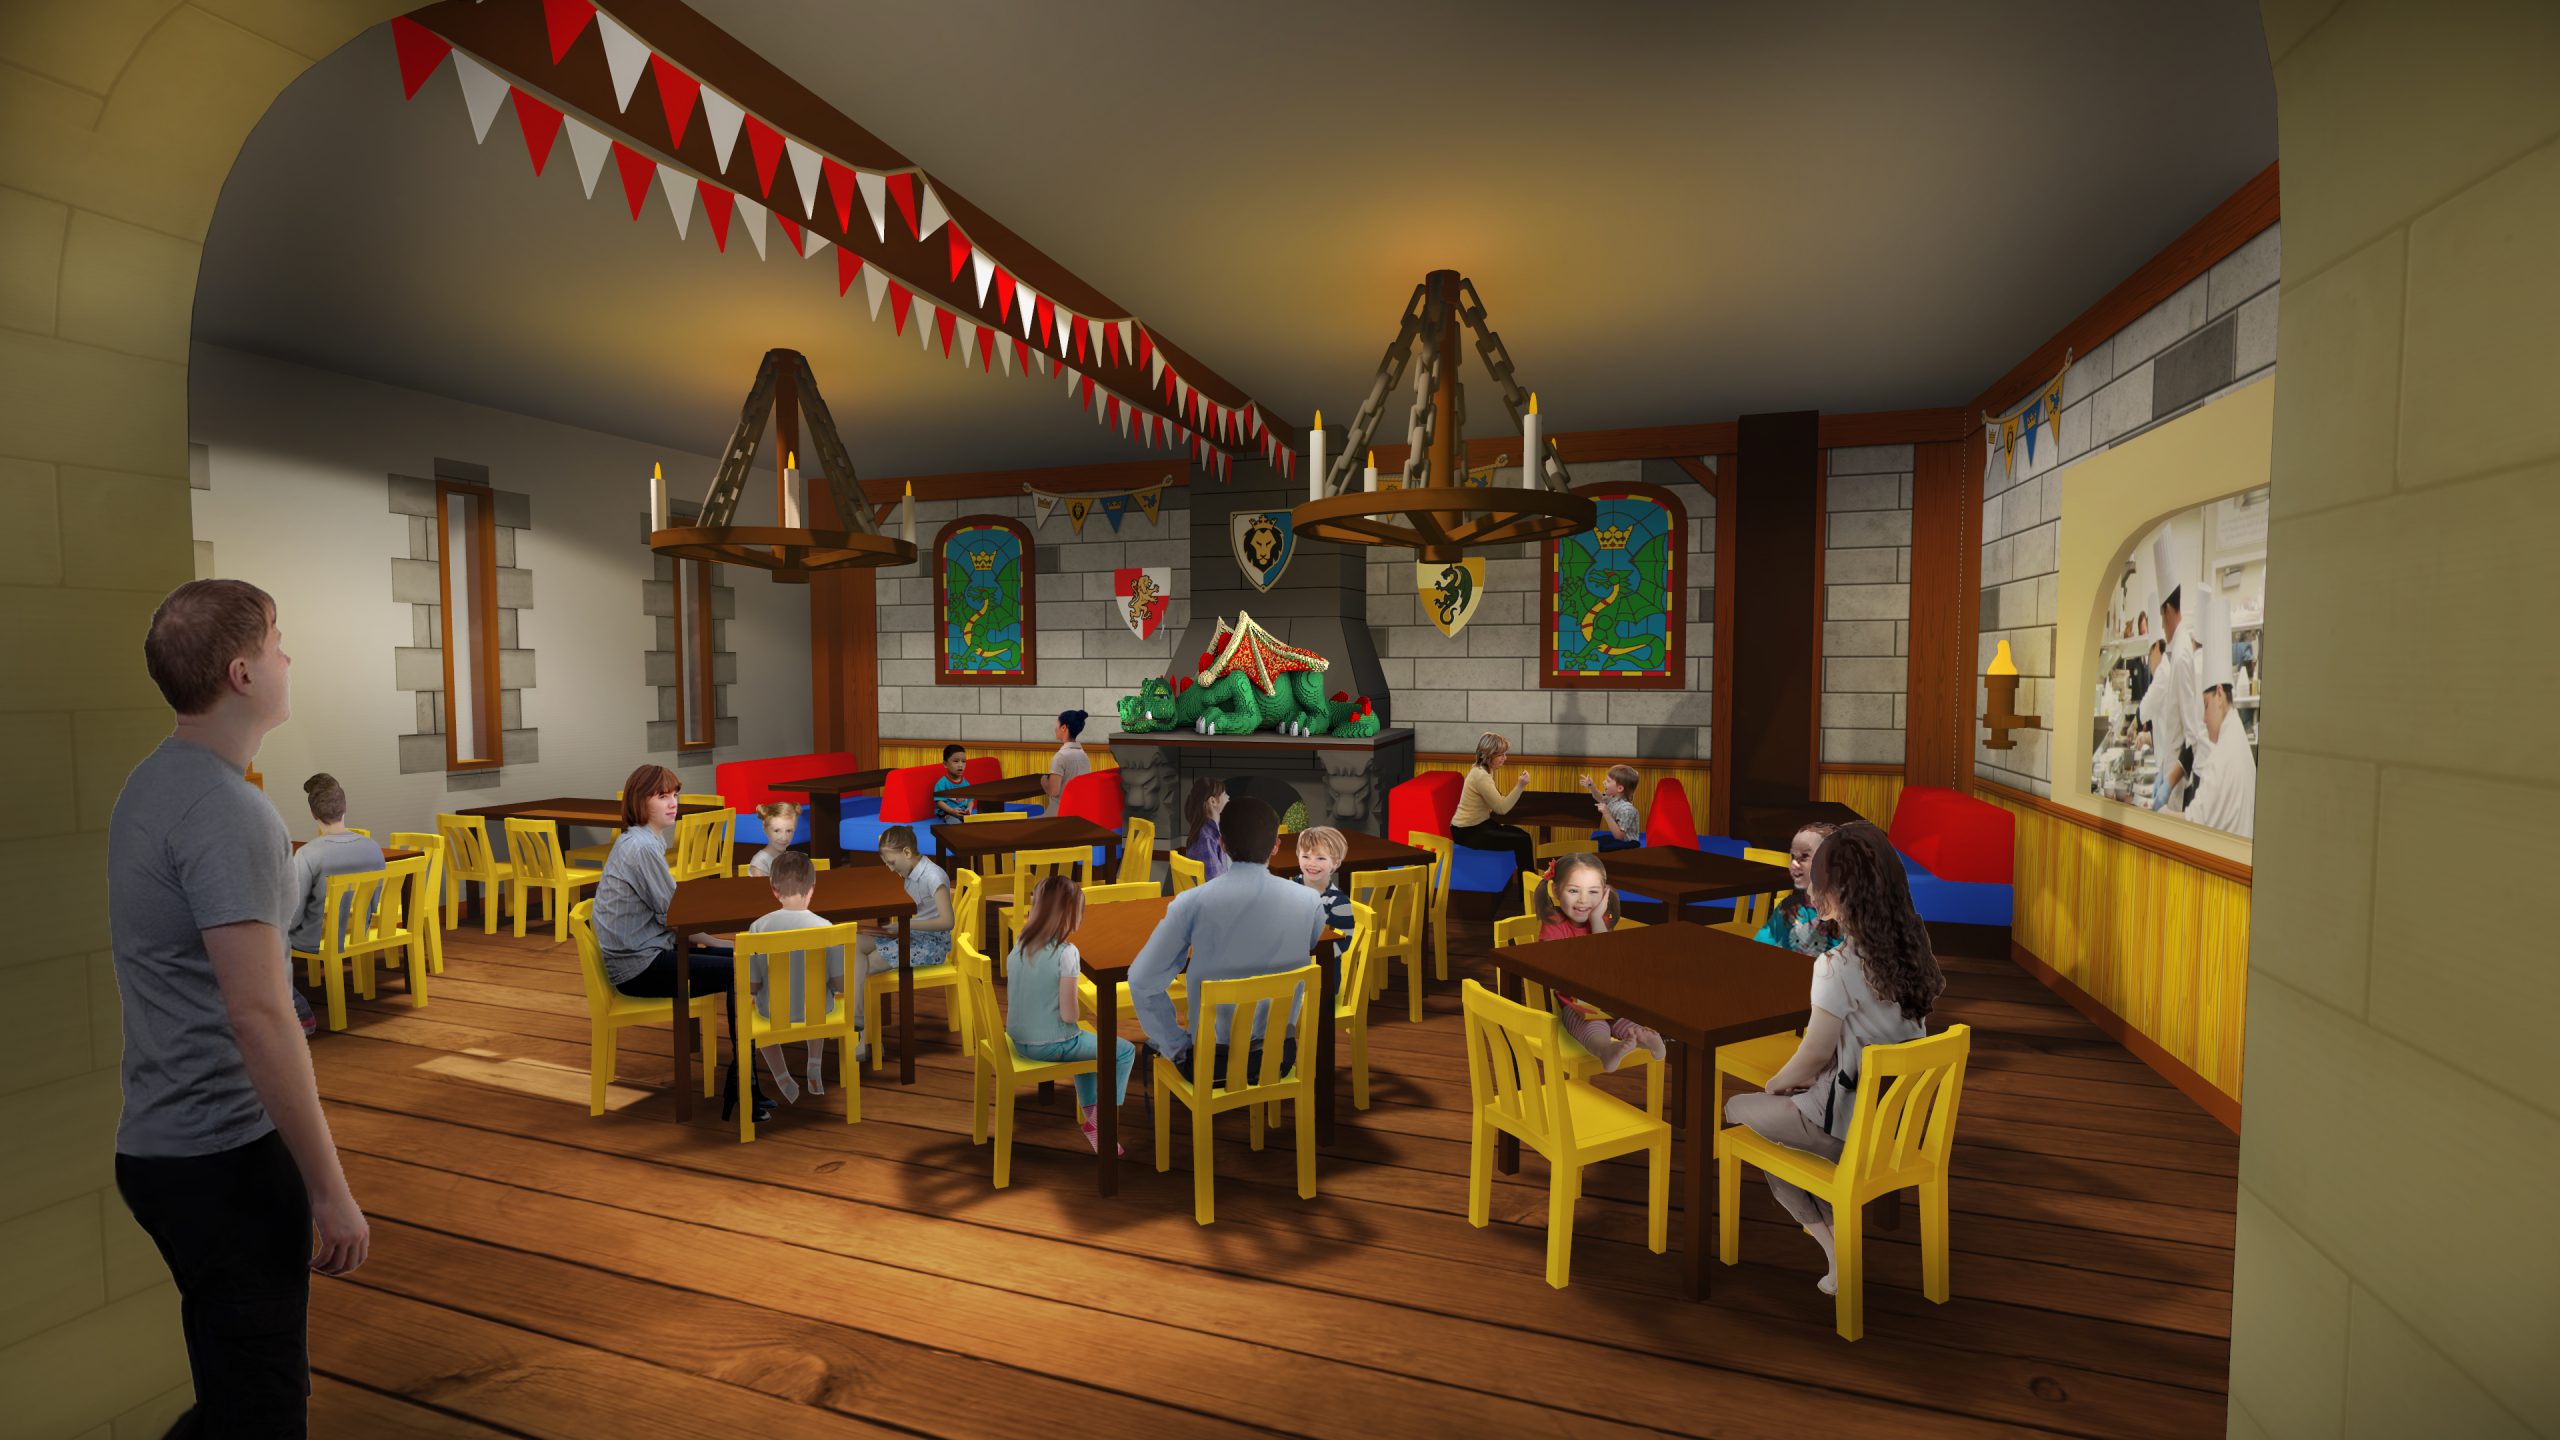 A concept image of a LEGO castle themed resturant room with brown tables and yellow chairs